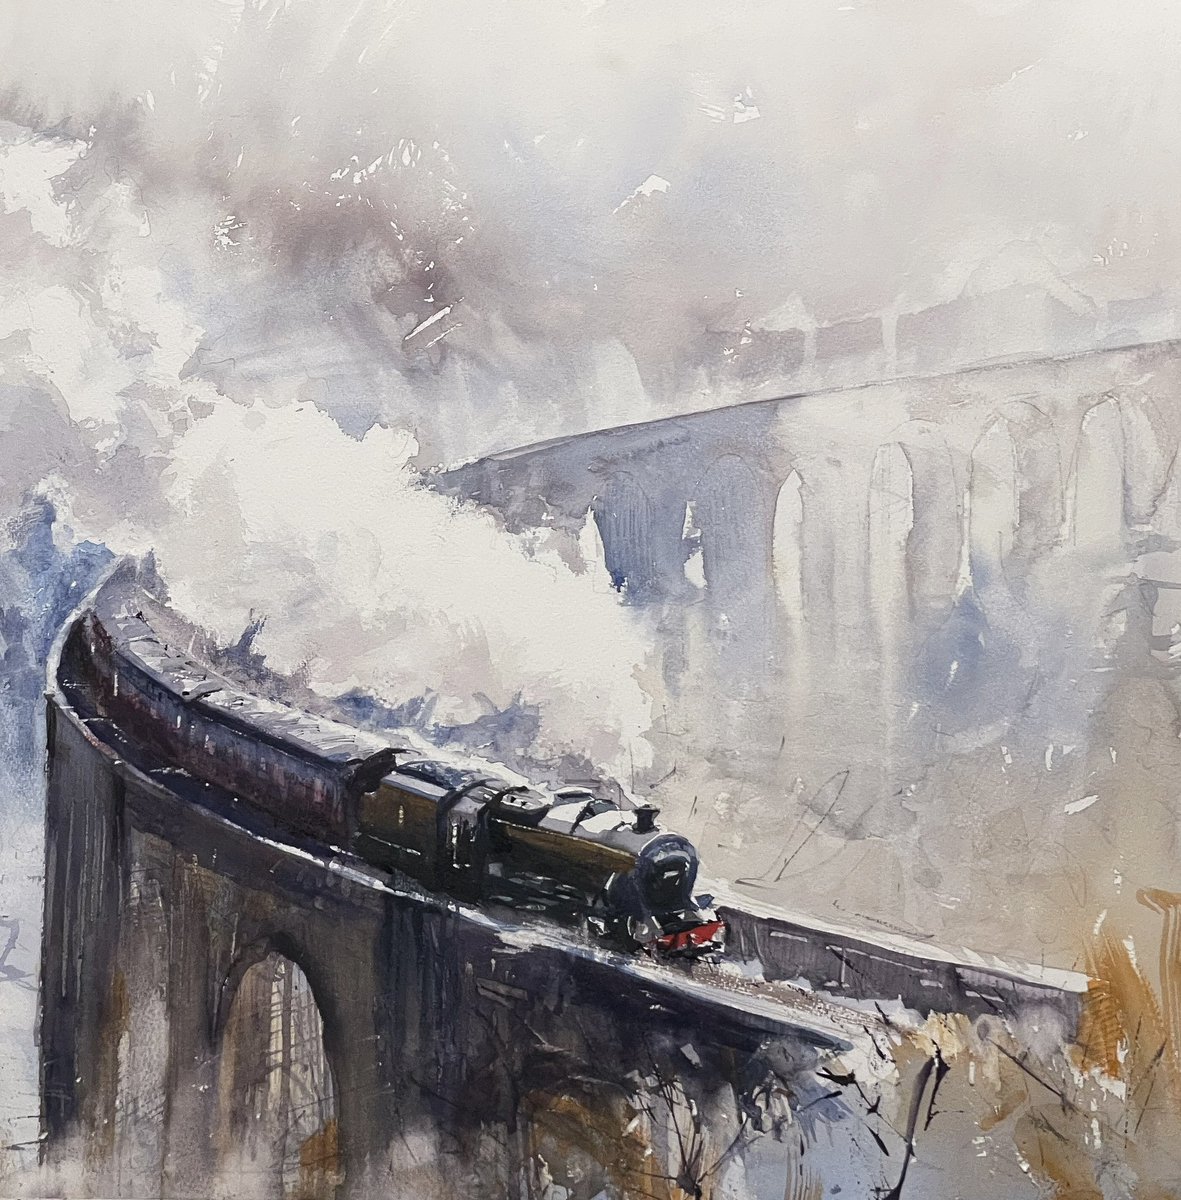 Today’s watercolour, Glenfinnan Viaduct in the Snow. 51 x 51cm on Millford paper using Schmincke watercolours. Painted here plein air twice, but my nephew got the killer train shot reference a few days ago.#glenfinnanviaduct #snow #steam